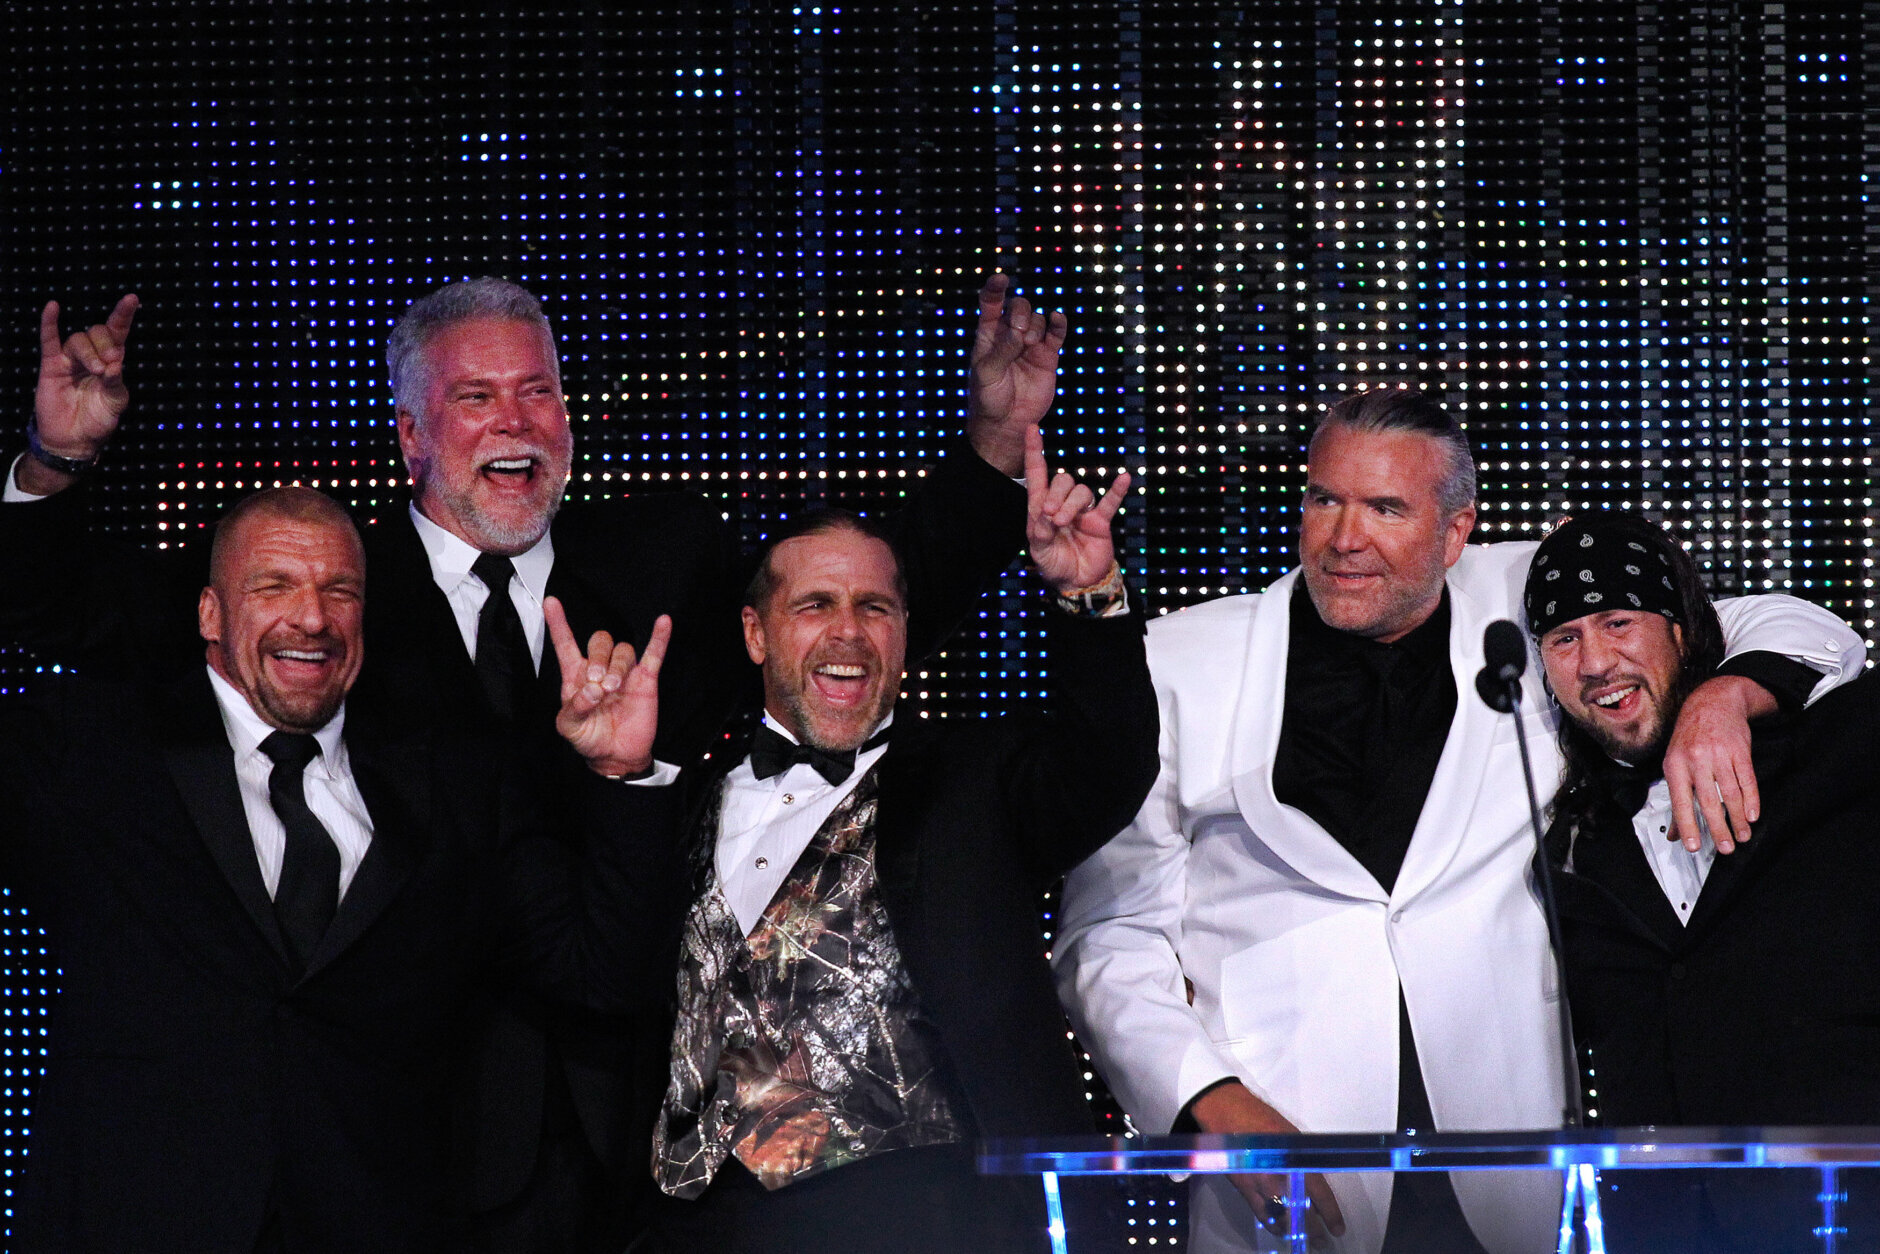 IMAGE DISTRIBUTED FOR WWE - From left to right, Paul Levesque aka Triple H, Kevin Nash, Michael Shawn Hickenbottom aka Shawn Michaels, 2014 inductee Scott Hall aka Razor Ramon, and Sean Waltman aka X-Pac, are seen at the WWE Hall of Fame Induction at the Smoothie King Center in New Orleans on Saturday, April 5, 2014. (Jonathan Bachman/AP Images for WWE)